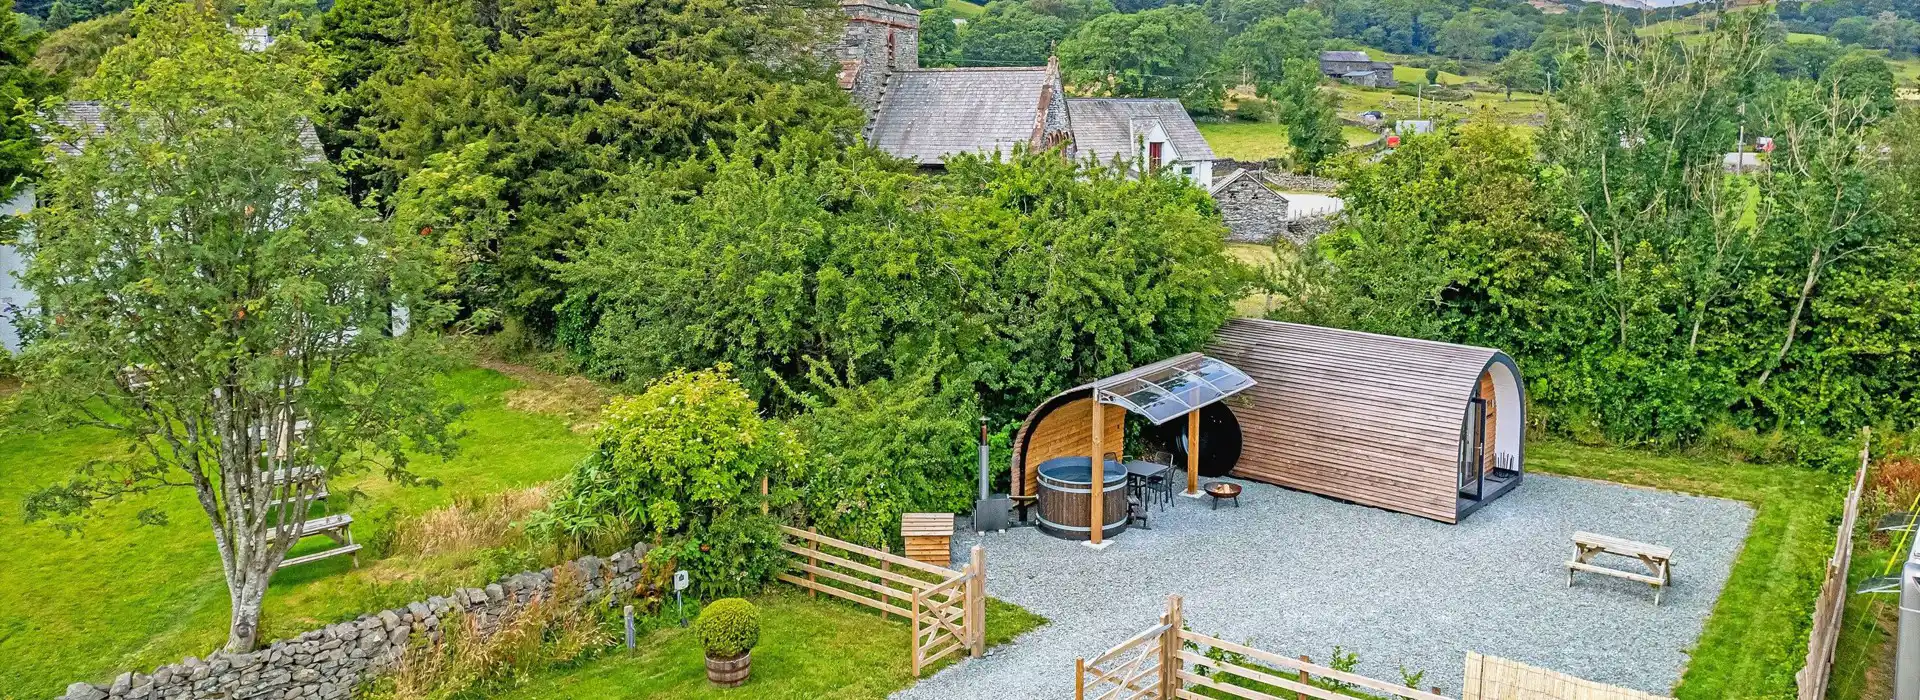 Bowness-on-Windermere camping and glamping pods